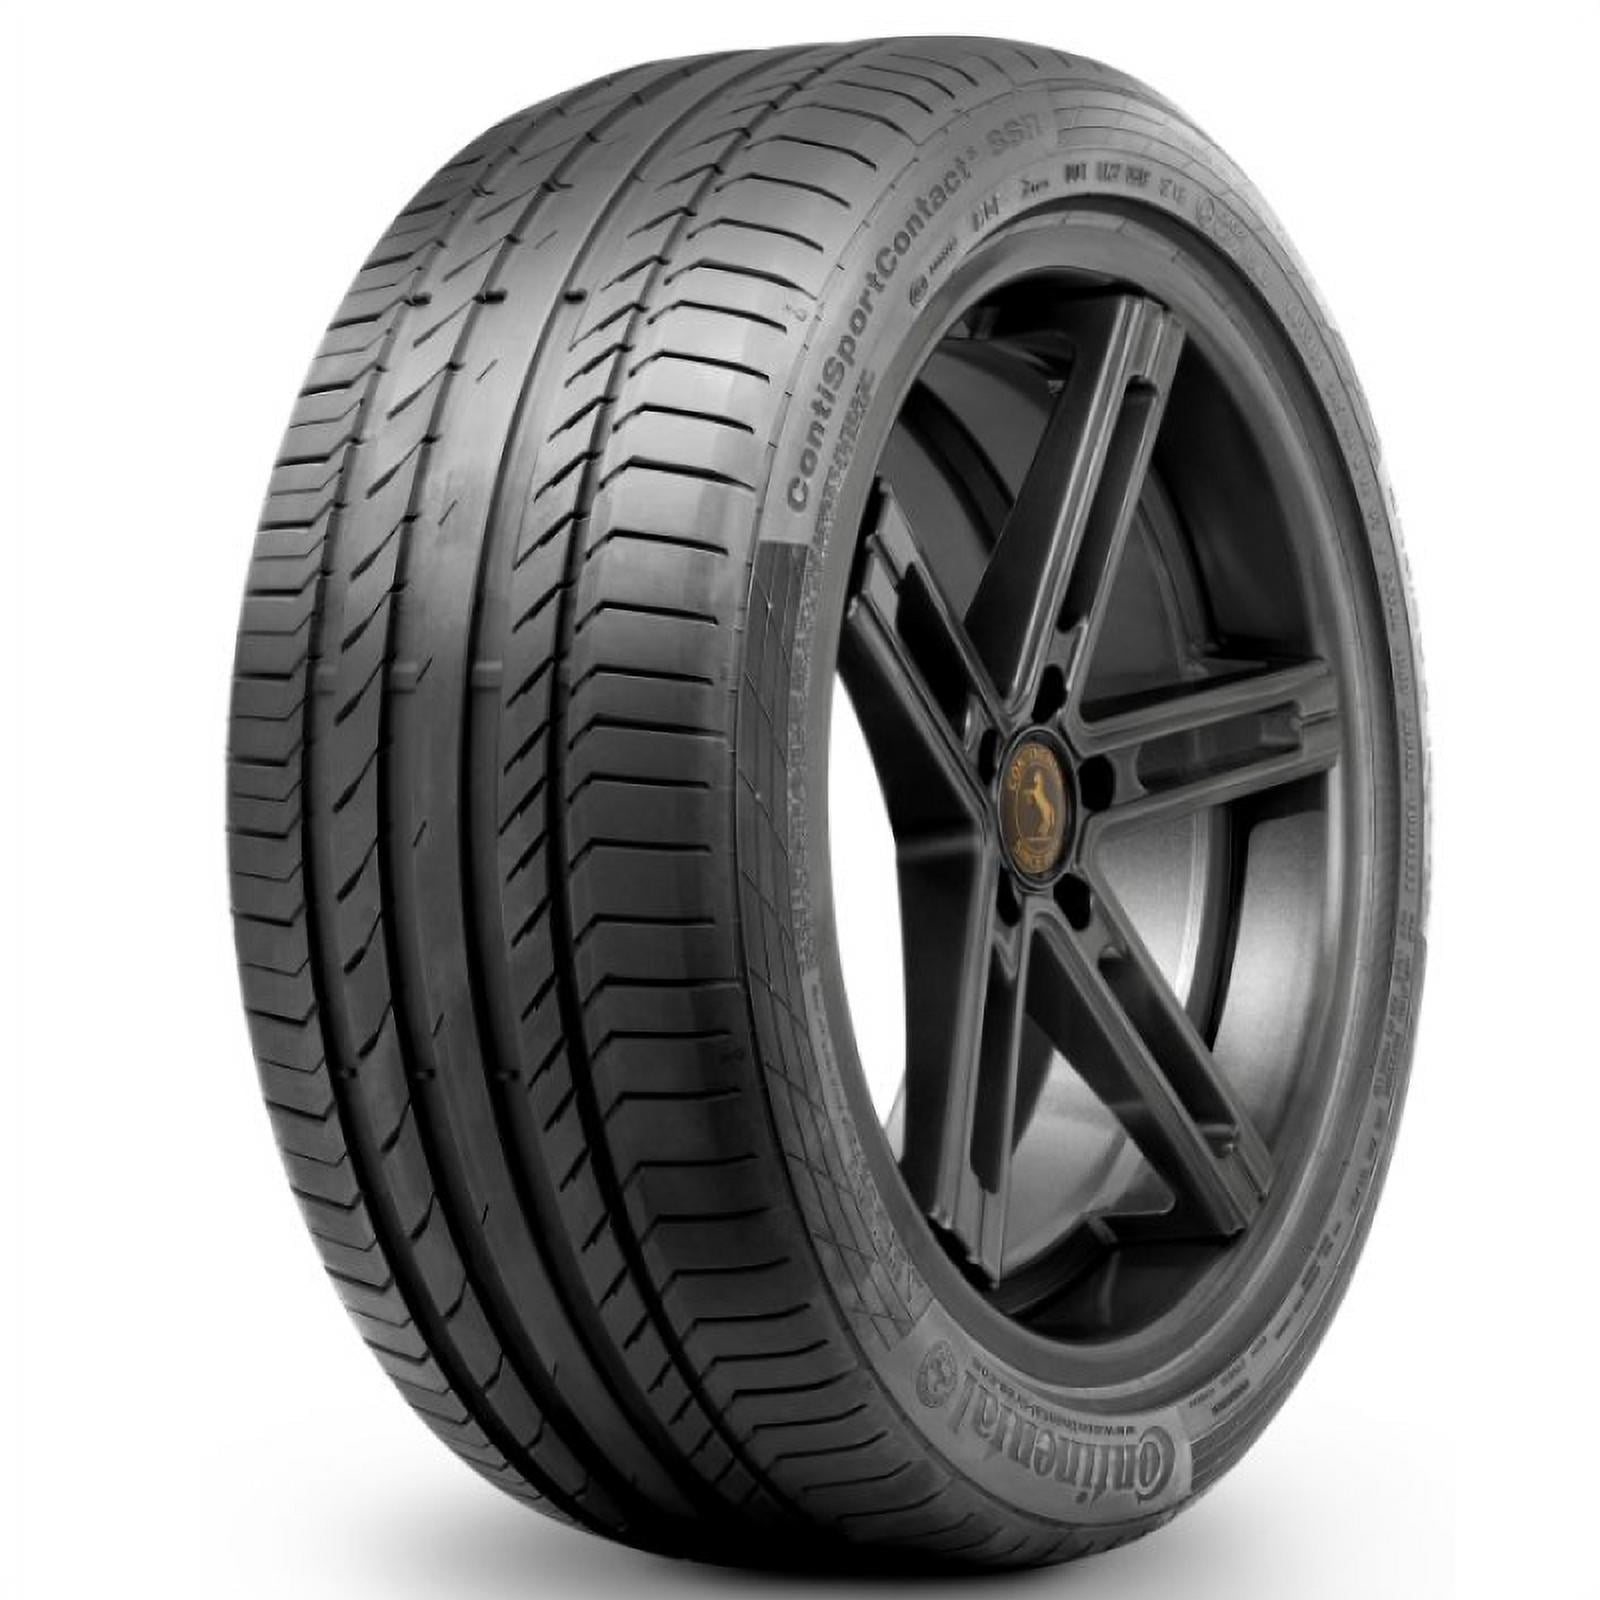 continental-tire-2019-rebate-tires-easy